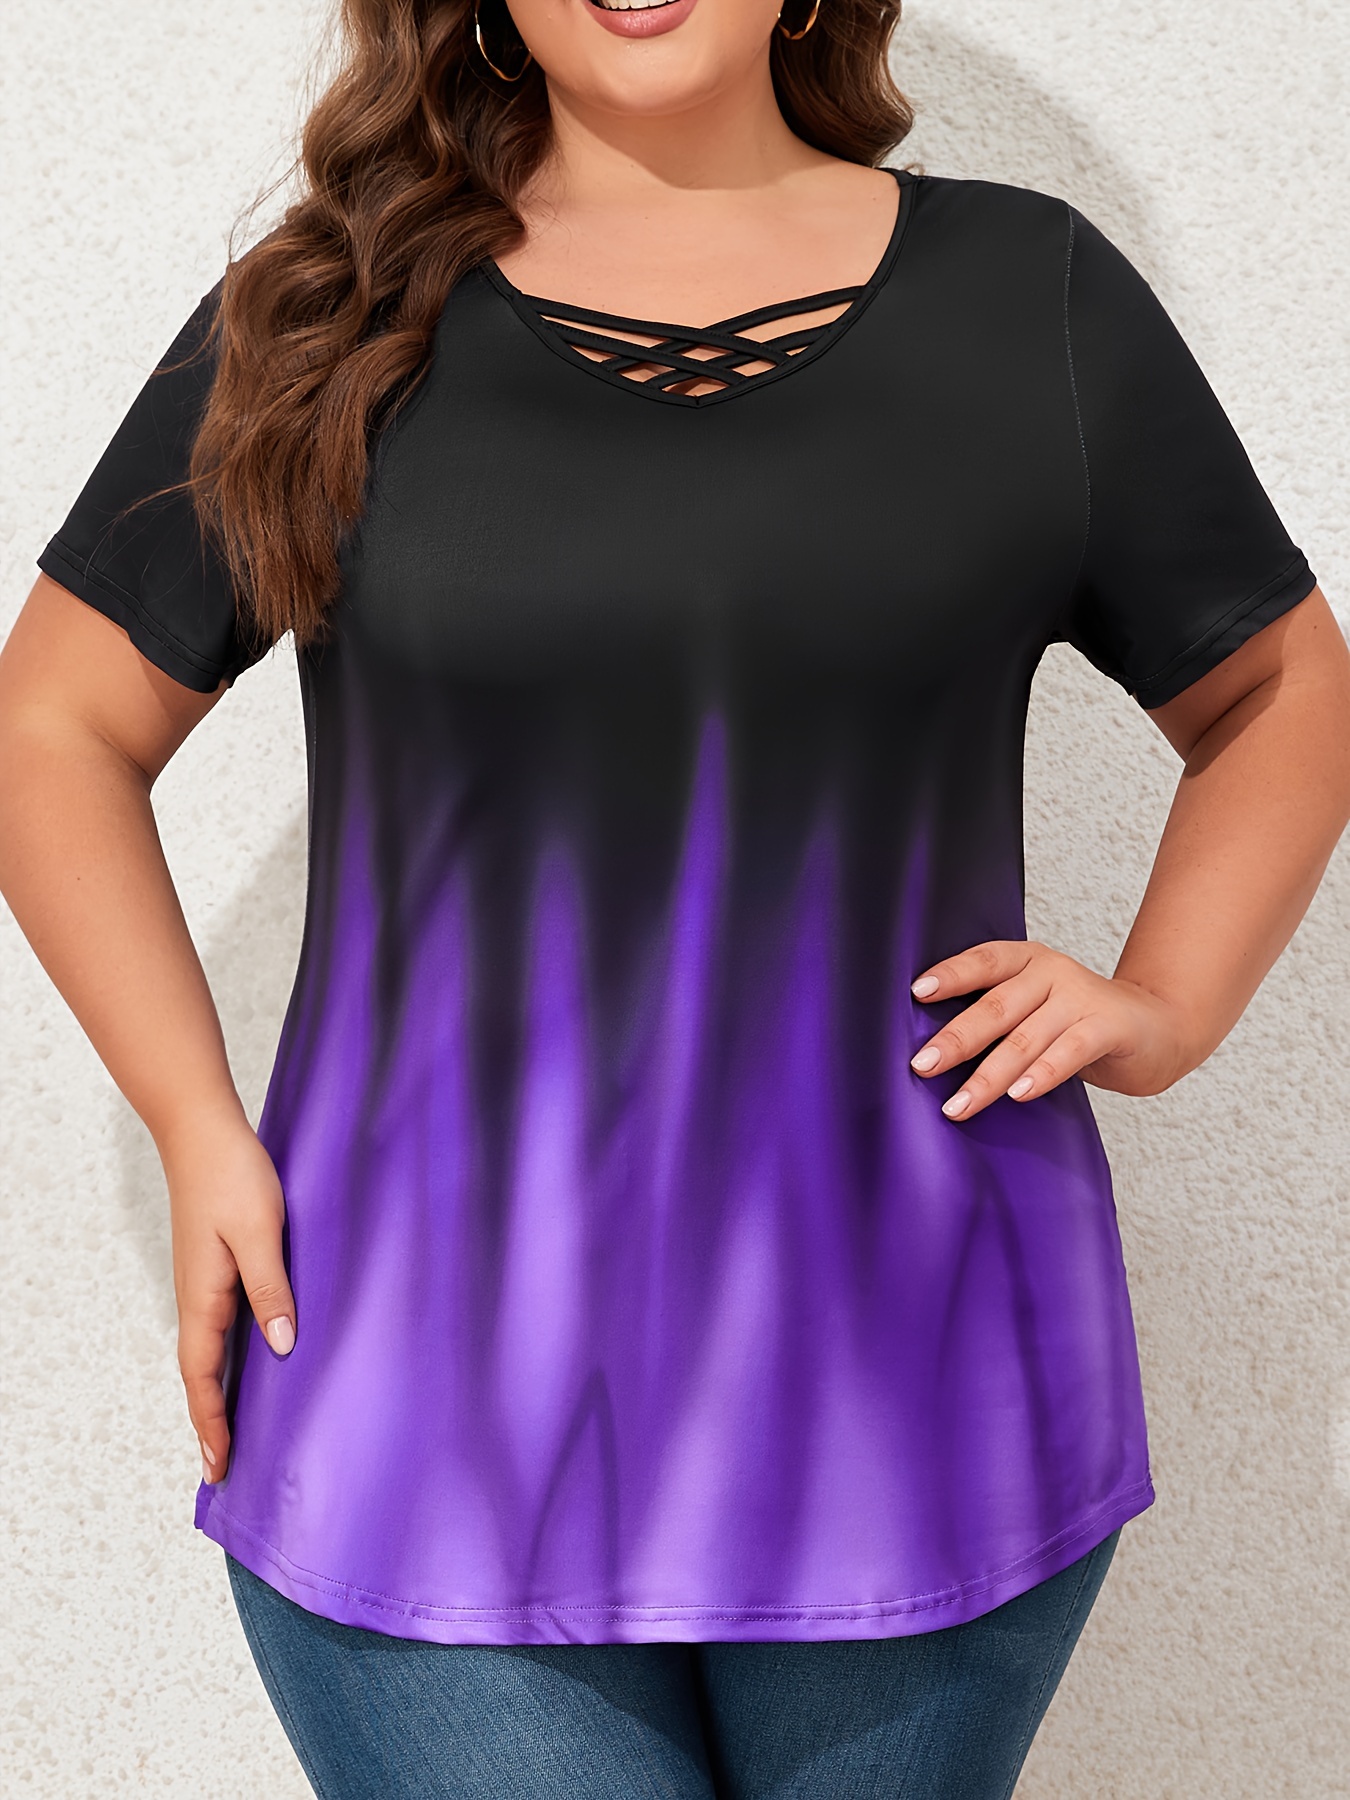  Plus Size T Shirts For Women 4X Casual Color Block Tops  Purple 28W